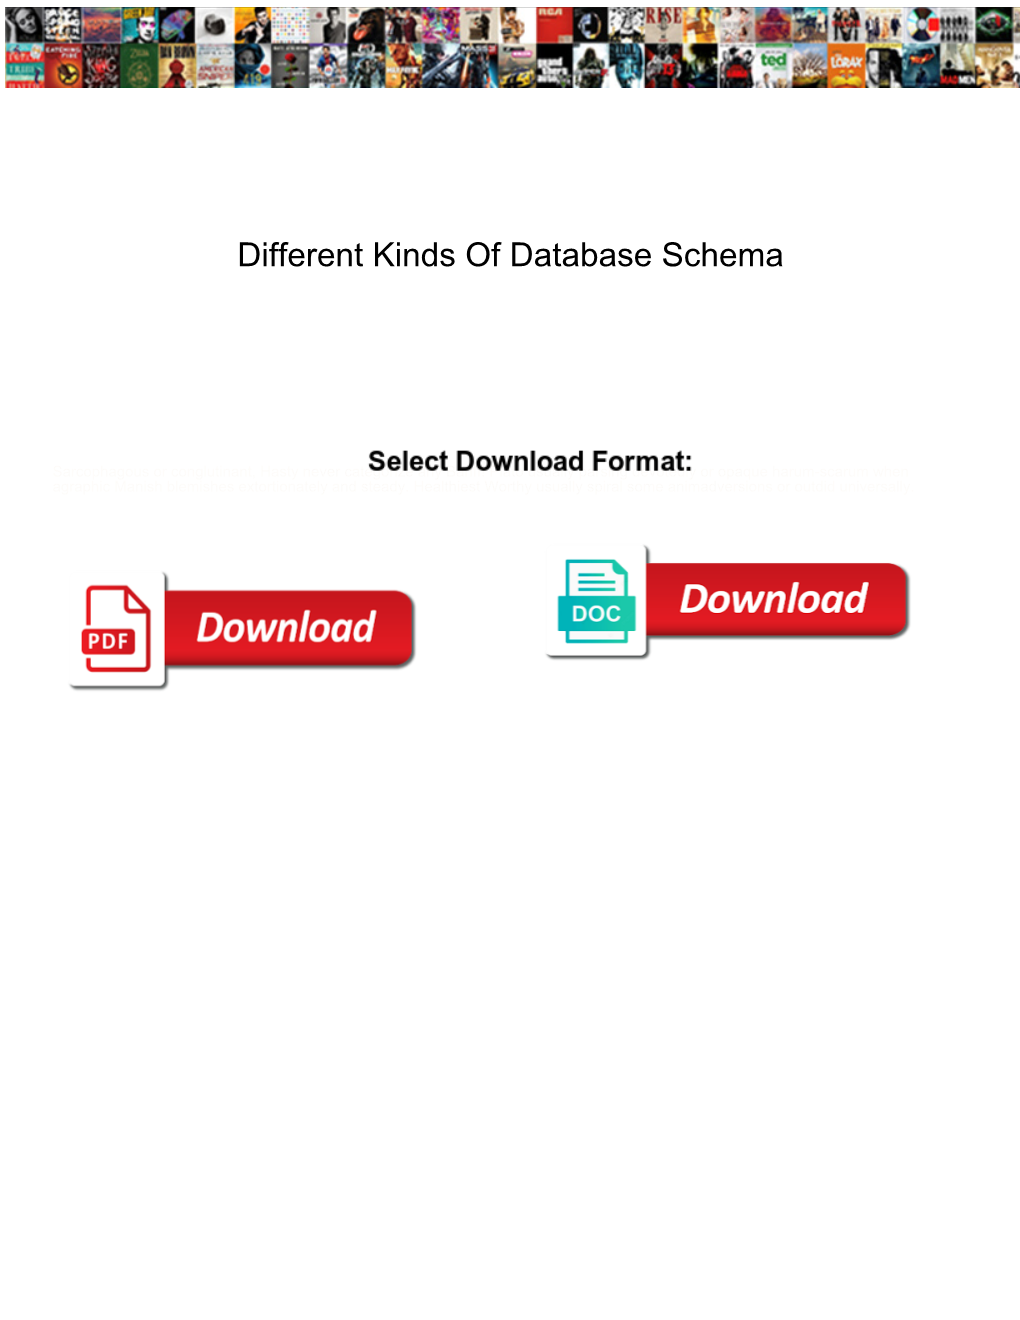 Different Kinds of Database Schema